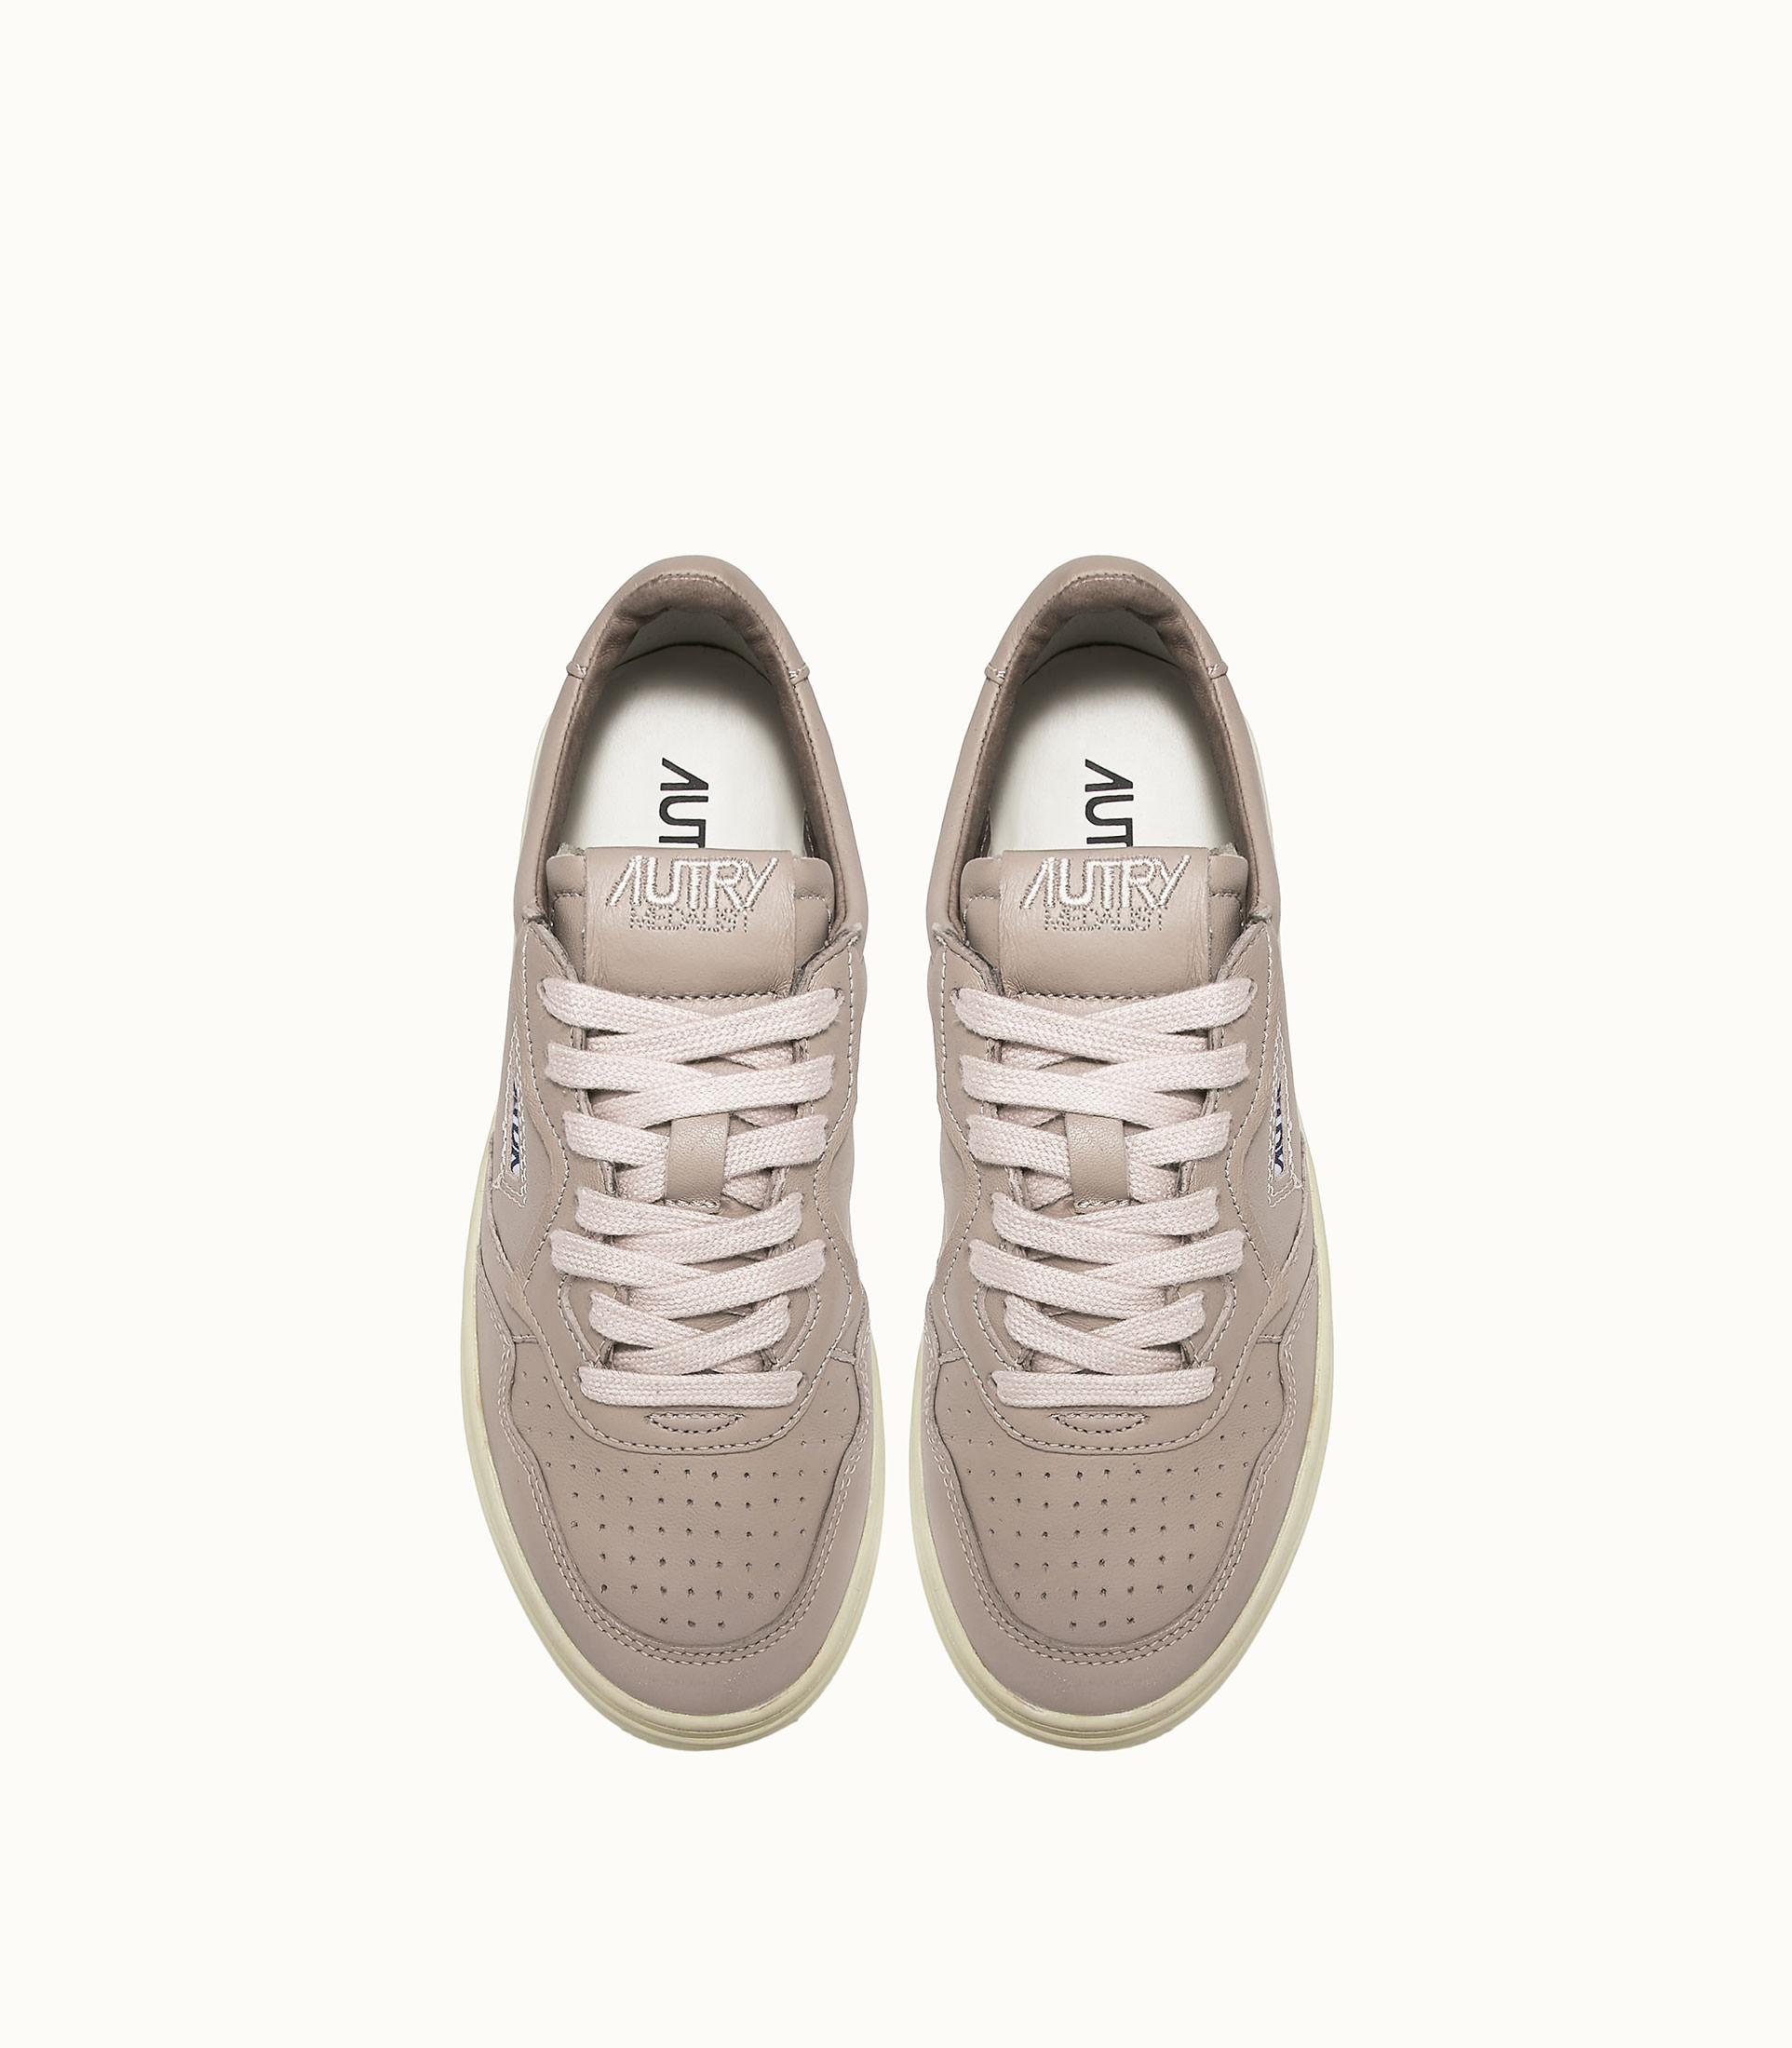 AUTRY 01 LOW-TOP SNEAKERS COLOR BEIGE | Playground